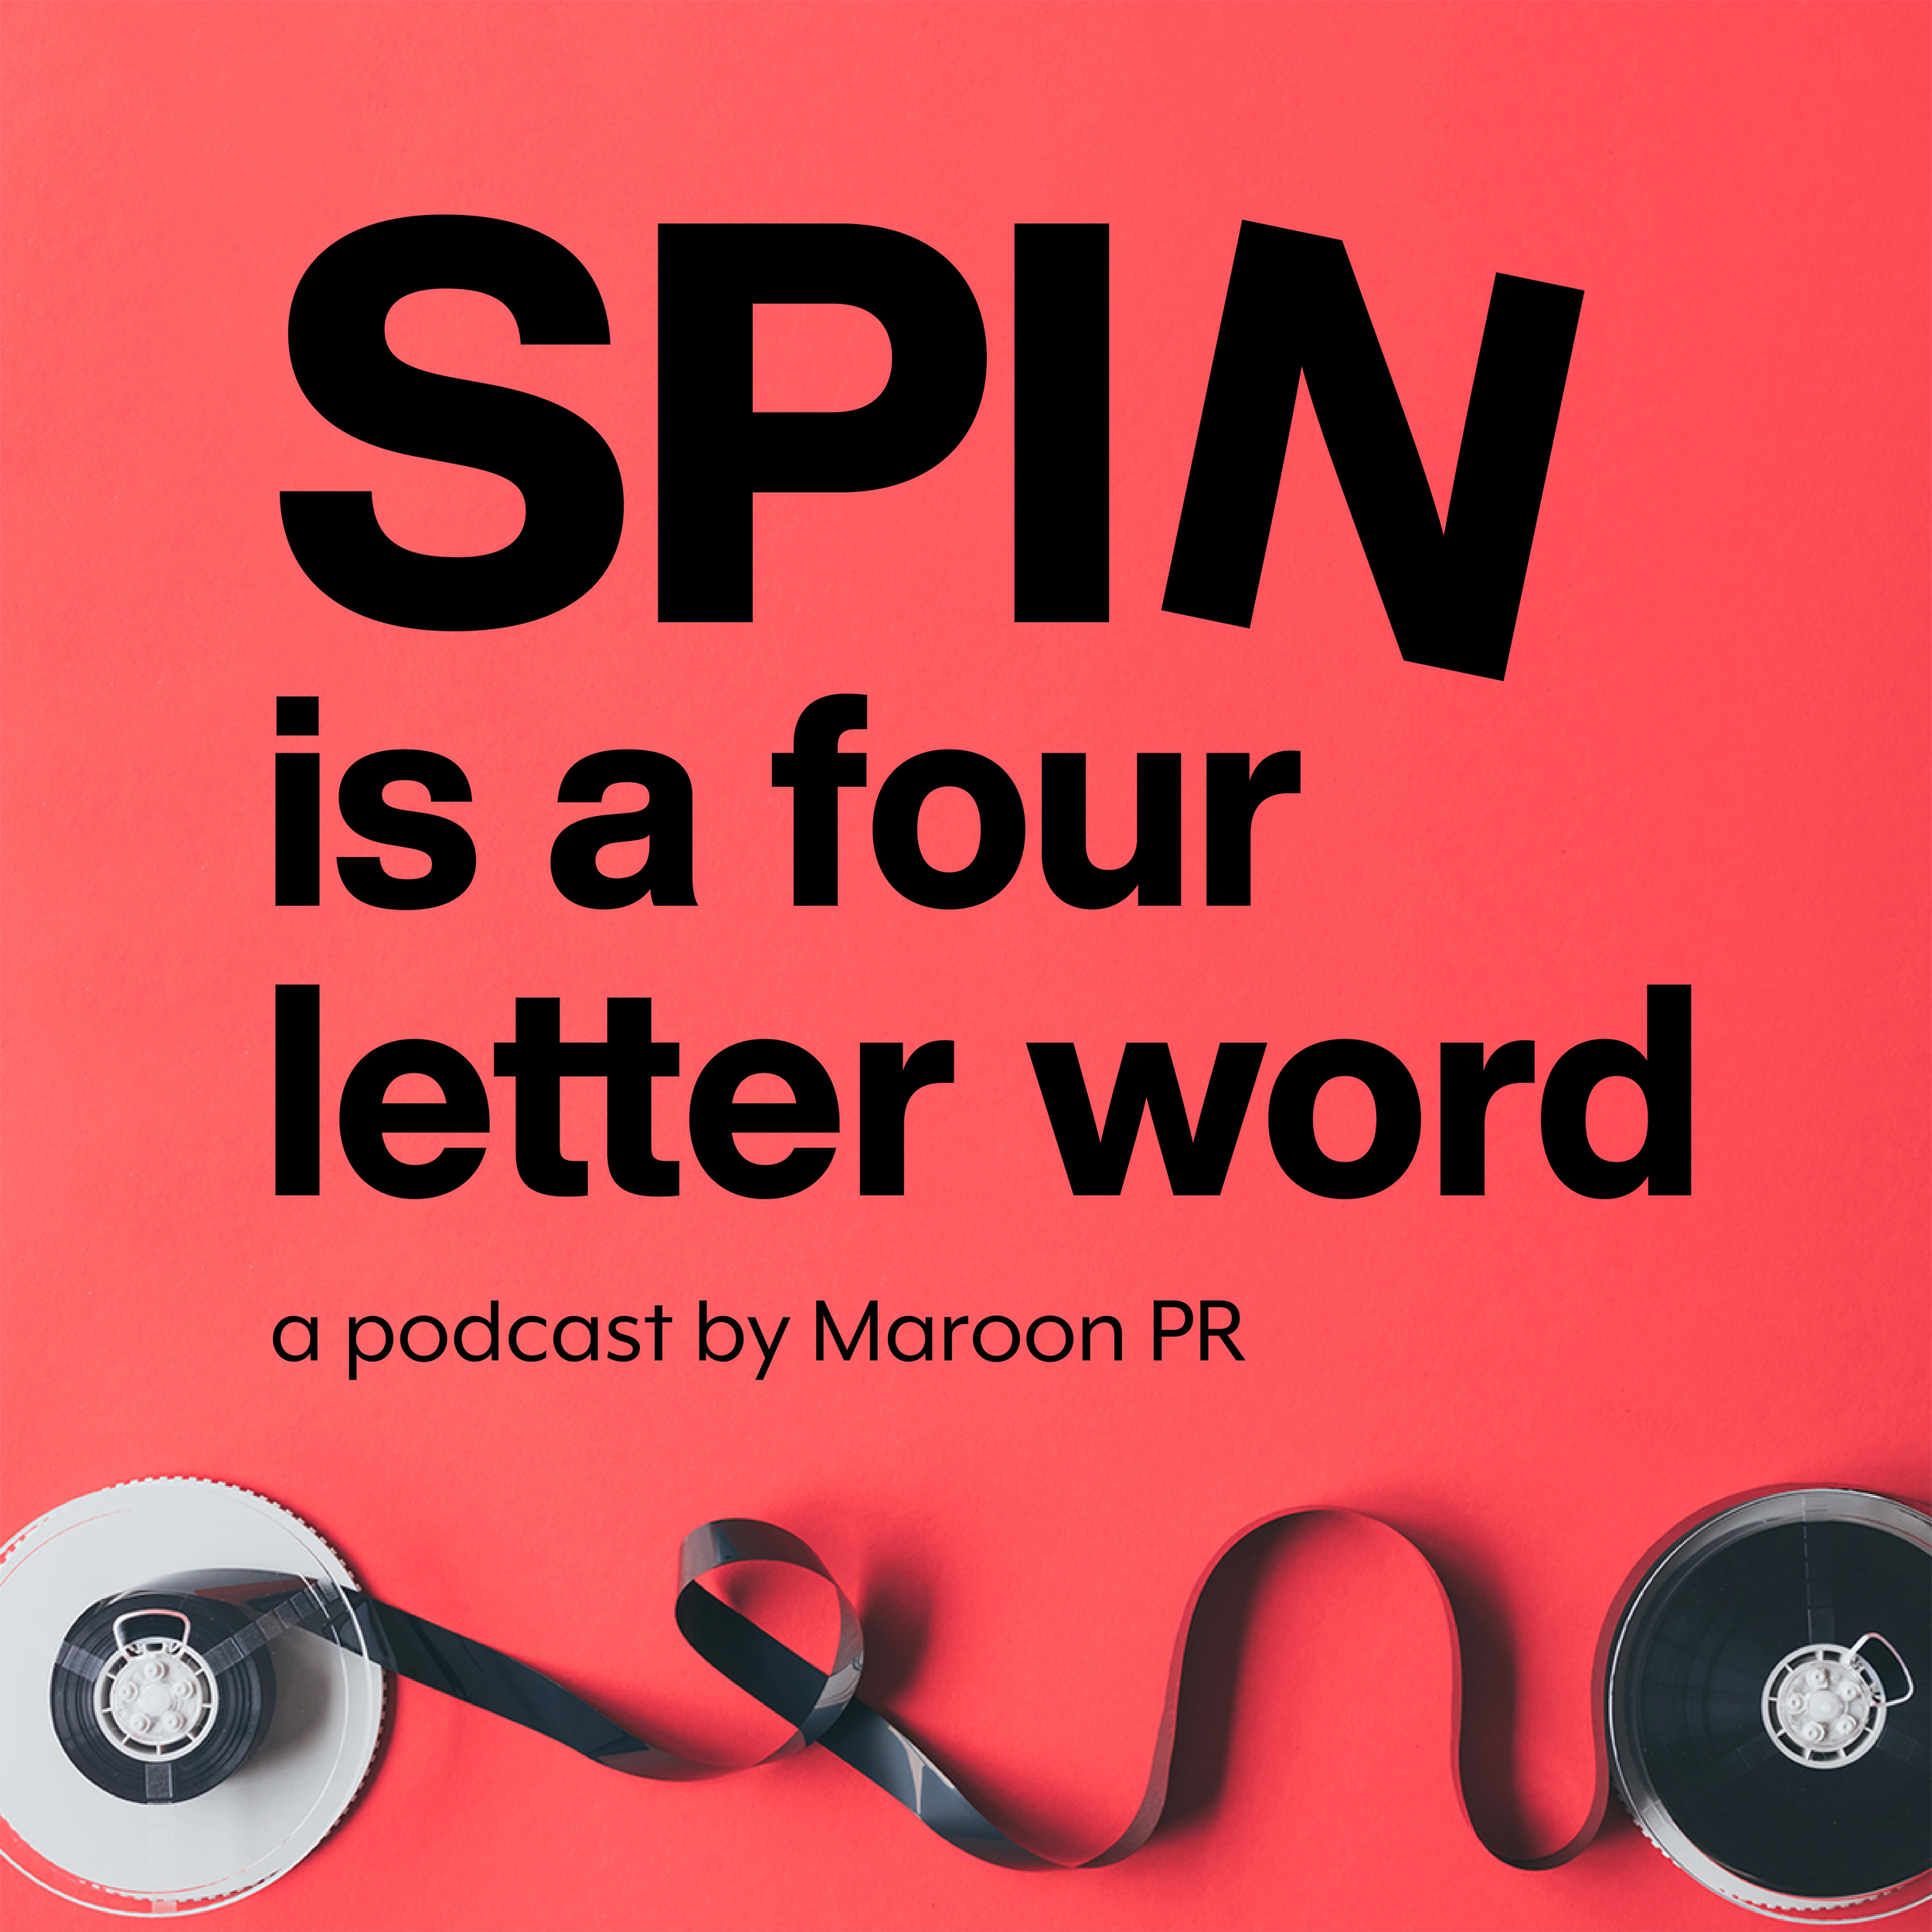 Trailer: SPIN is a Four Letter Word